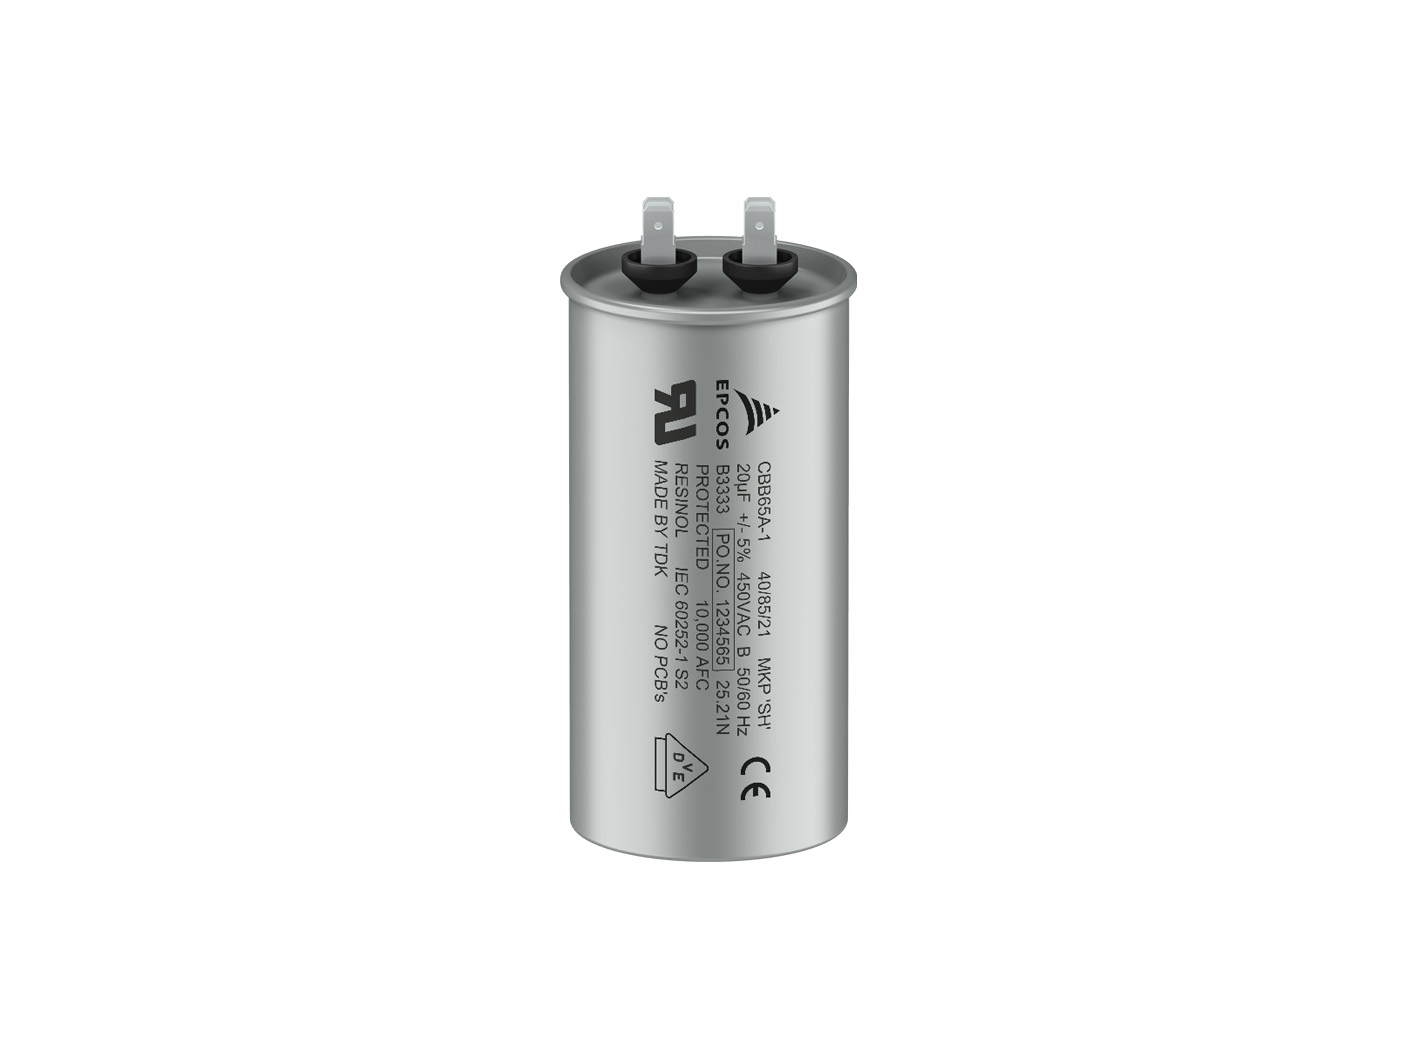 TDK Releases the Most Compact Safety Class S2 Motor-Run Capacitors